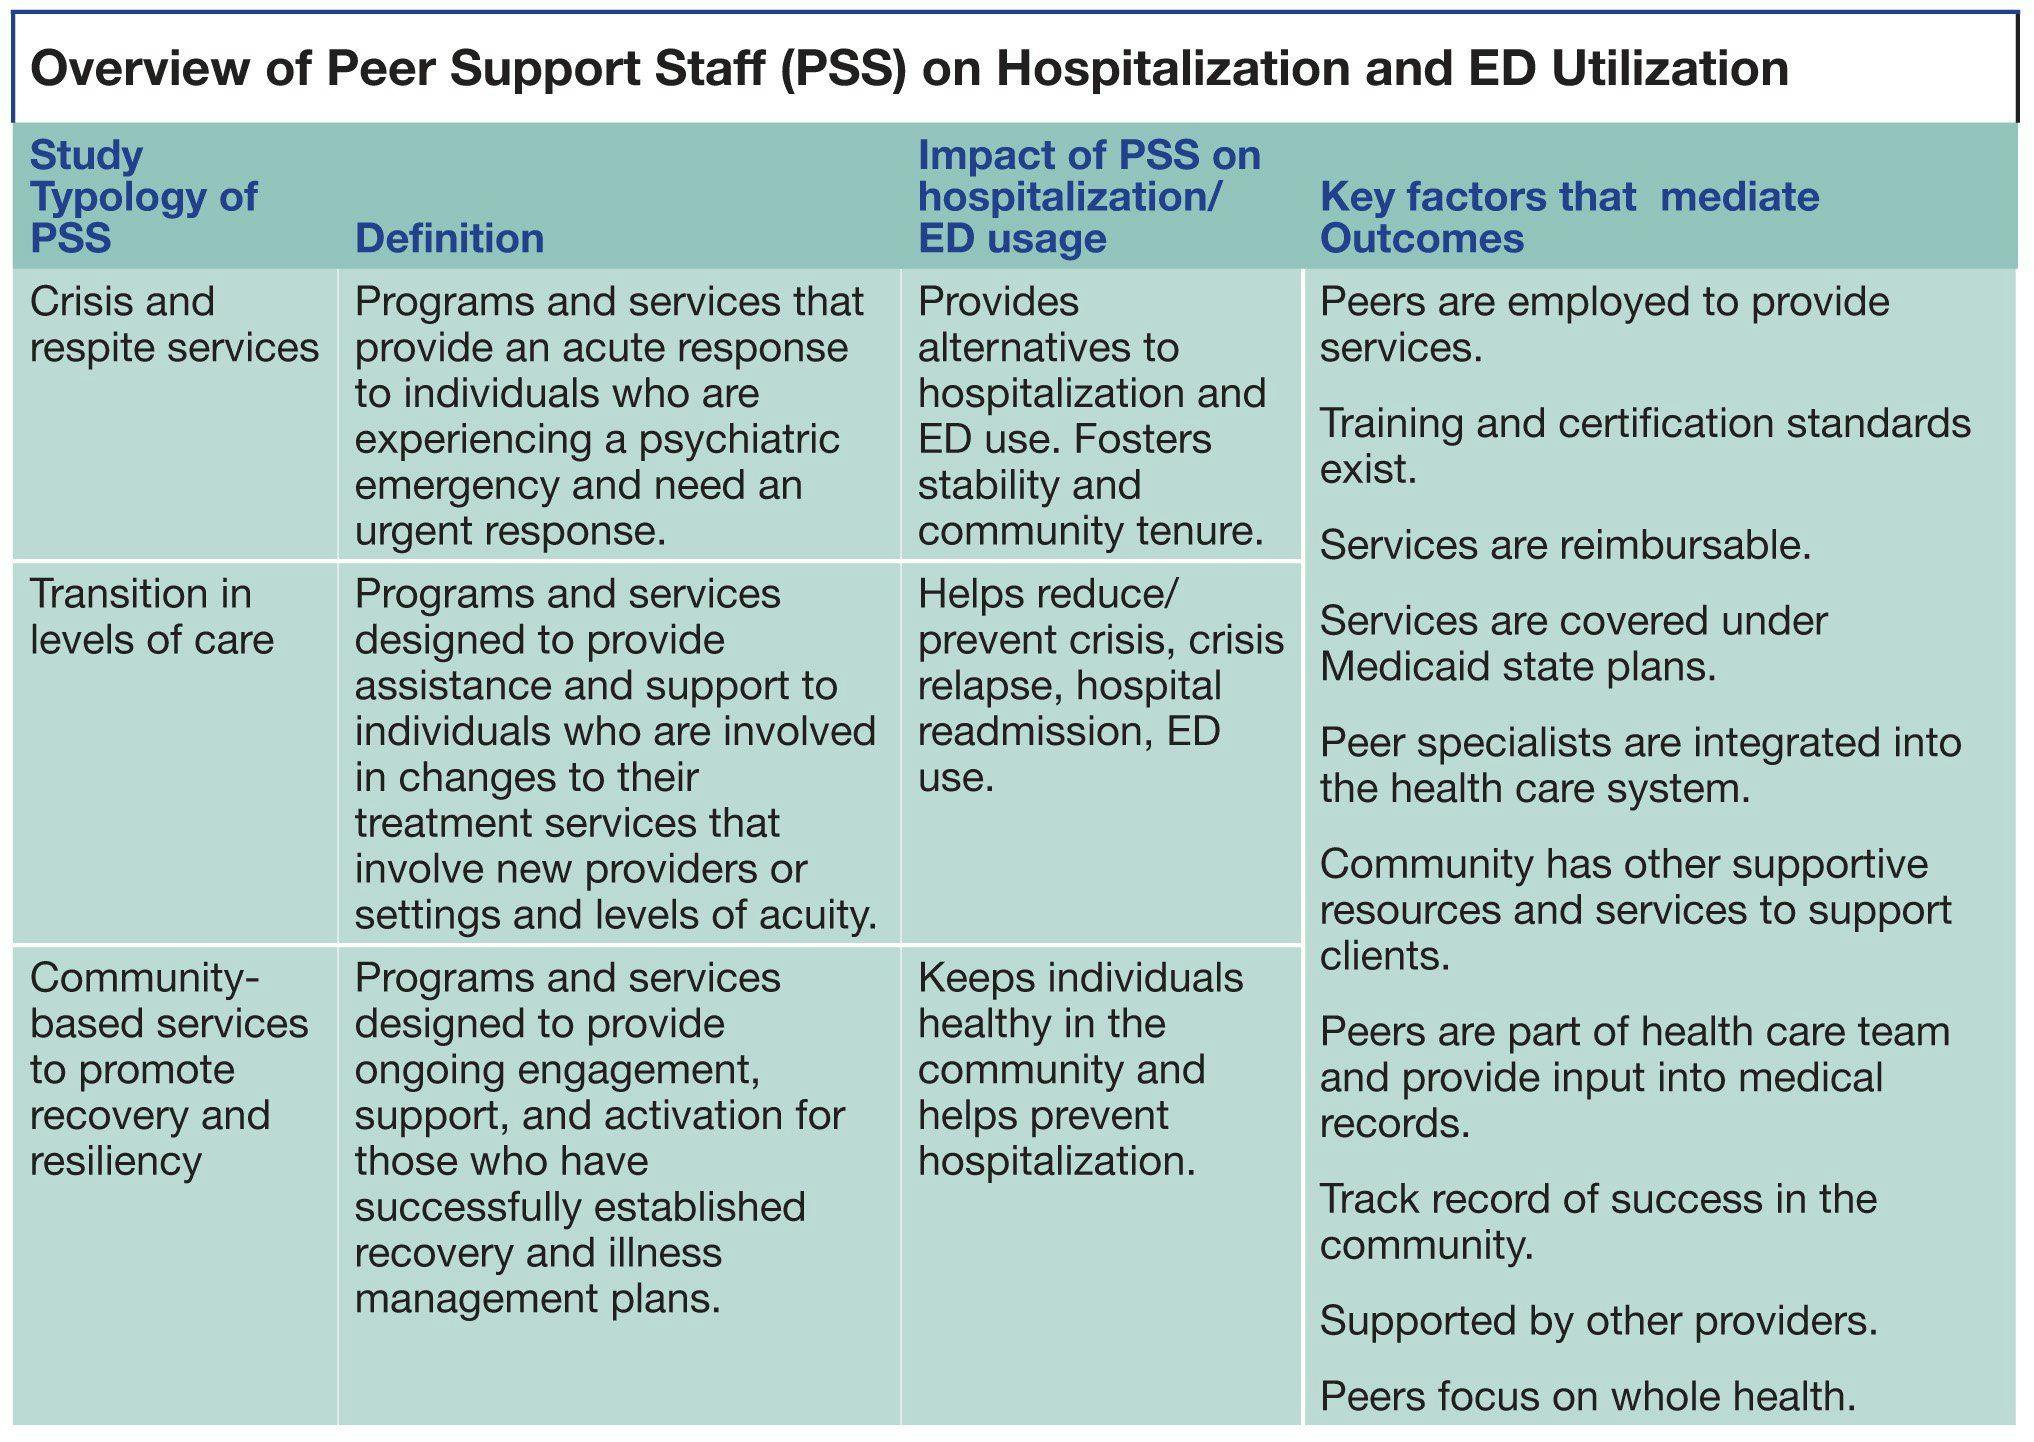 Overview of Peer Support Staff (PSS) on Hospitalization and ED Utilization